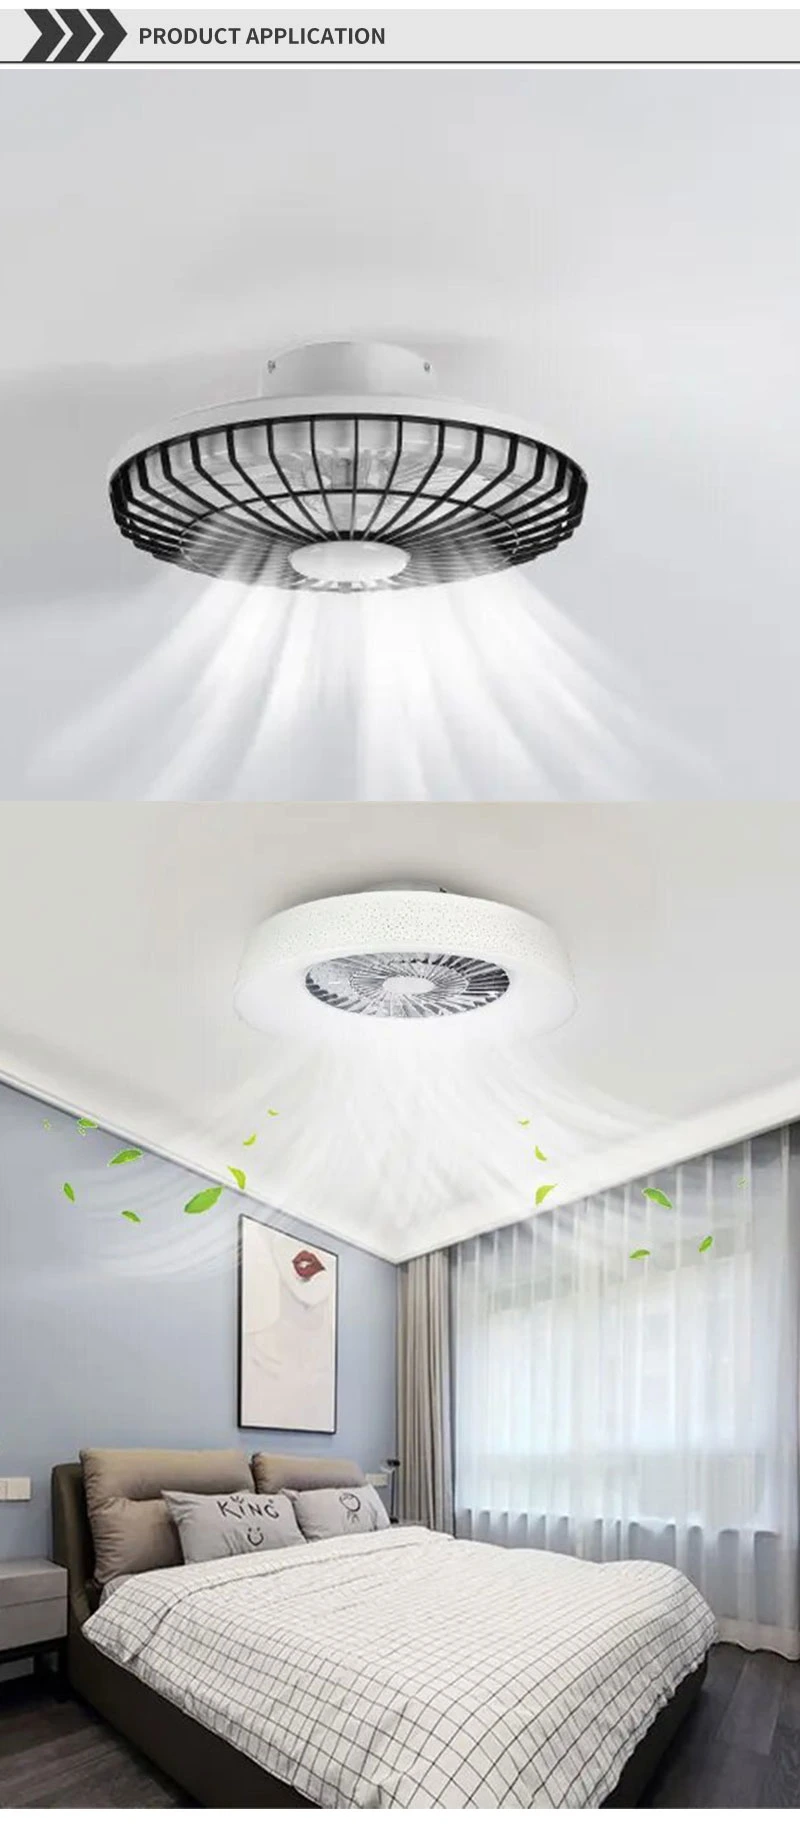 LED Light 6 Speed Wind Ceiling Lamp with Remote Control Ceiling Lights with Fan